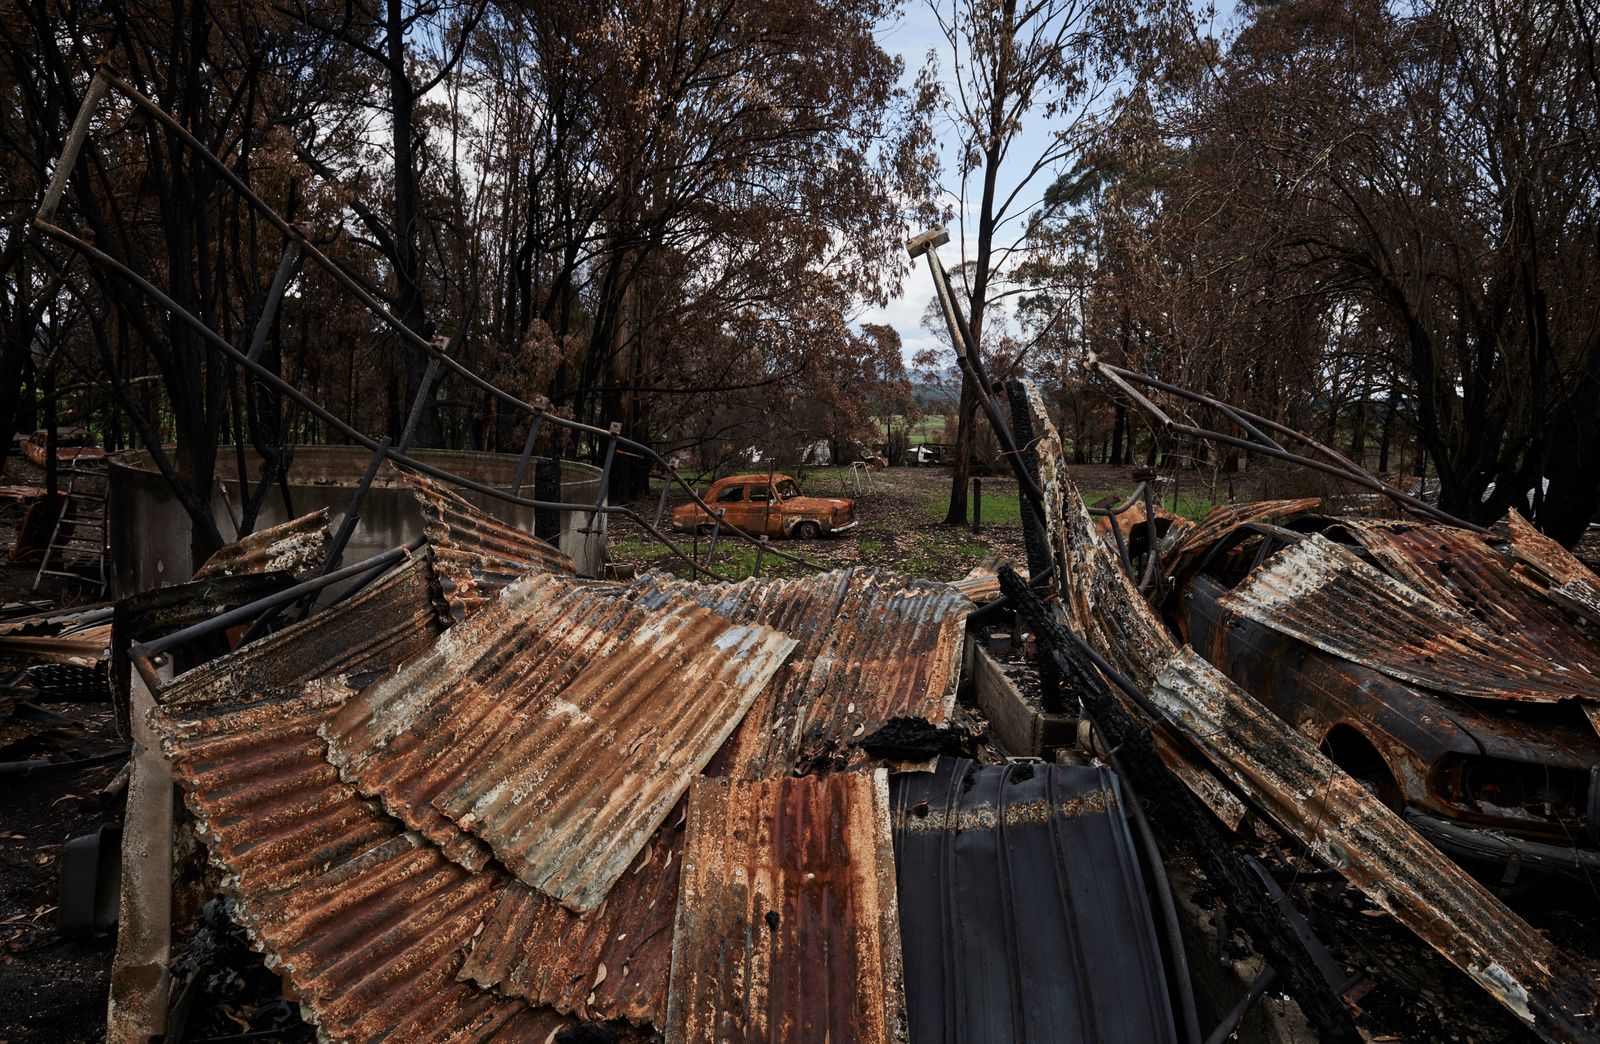 © Christina Simons - Image from the Australian Apocalypse: The Consequences of the Australian Bushfires photography project